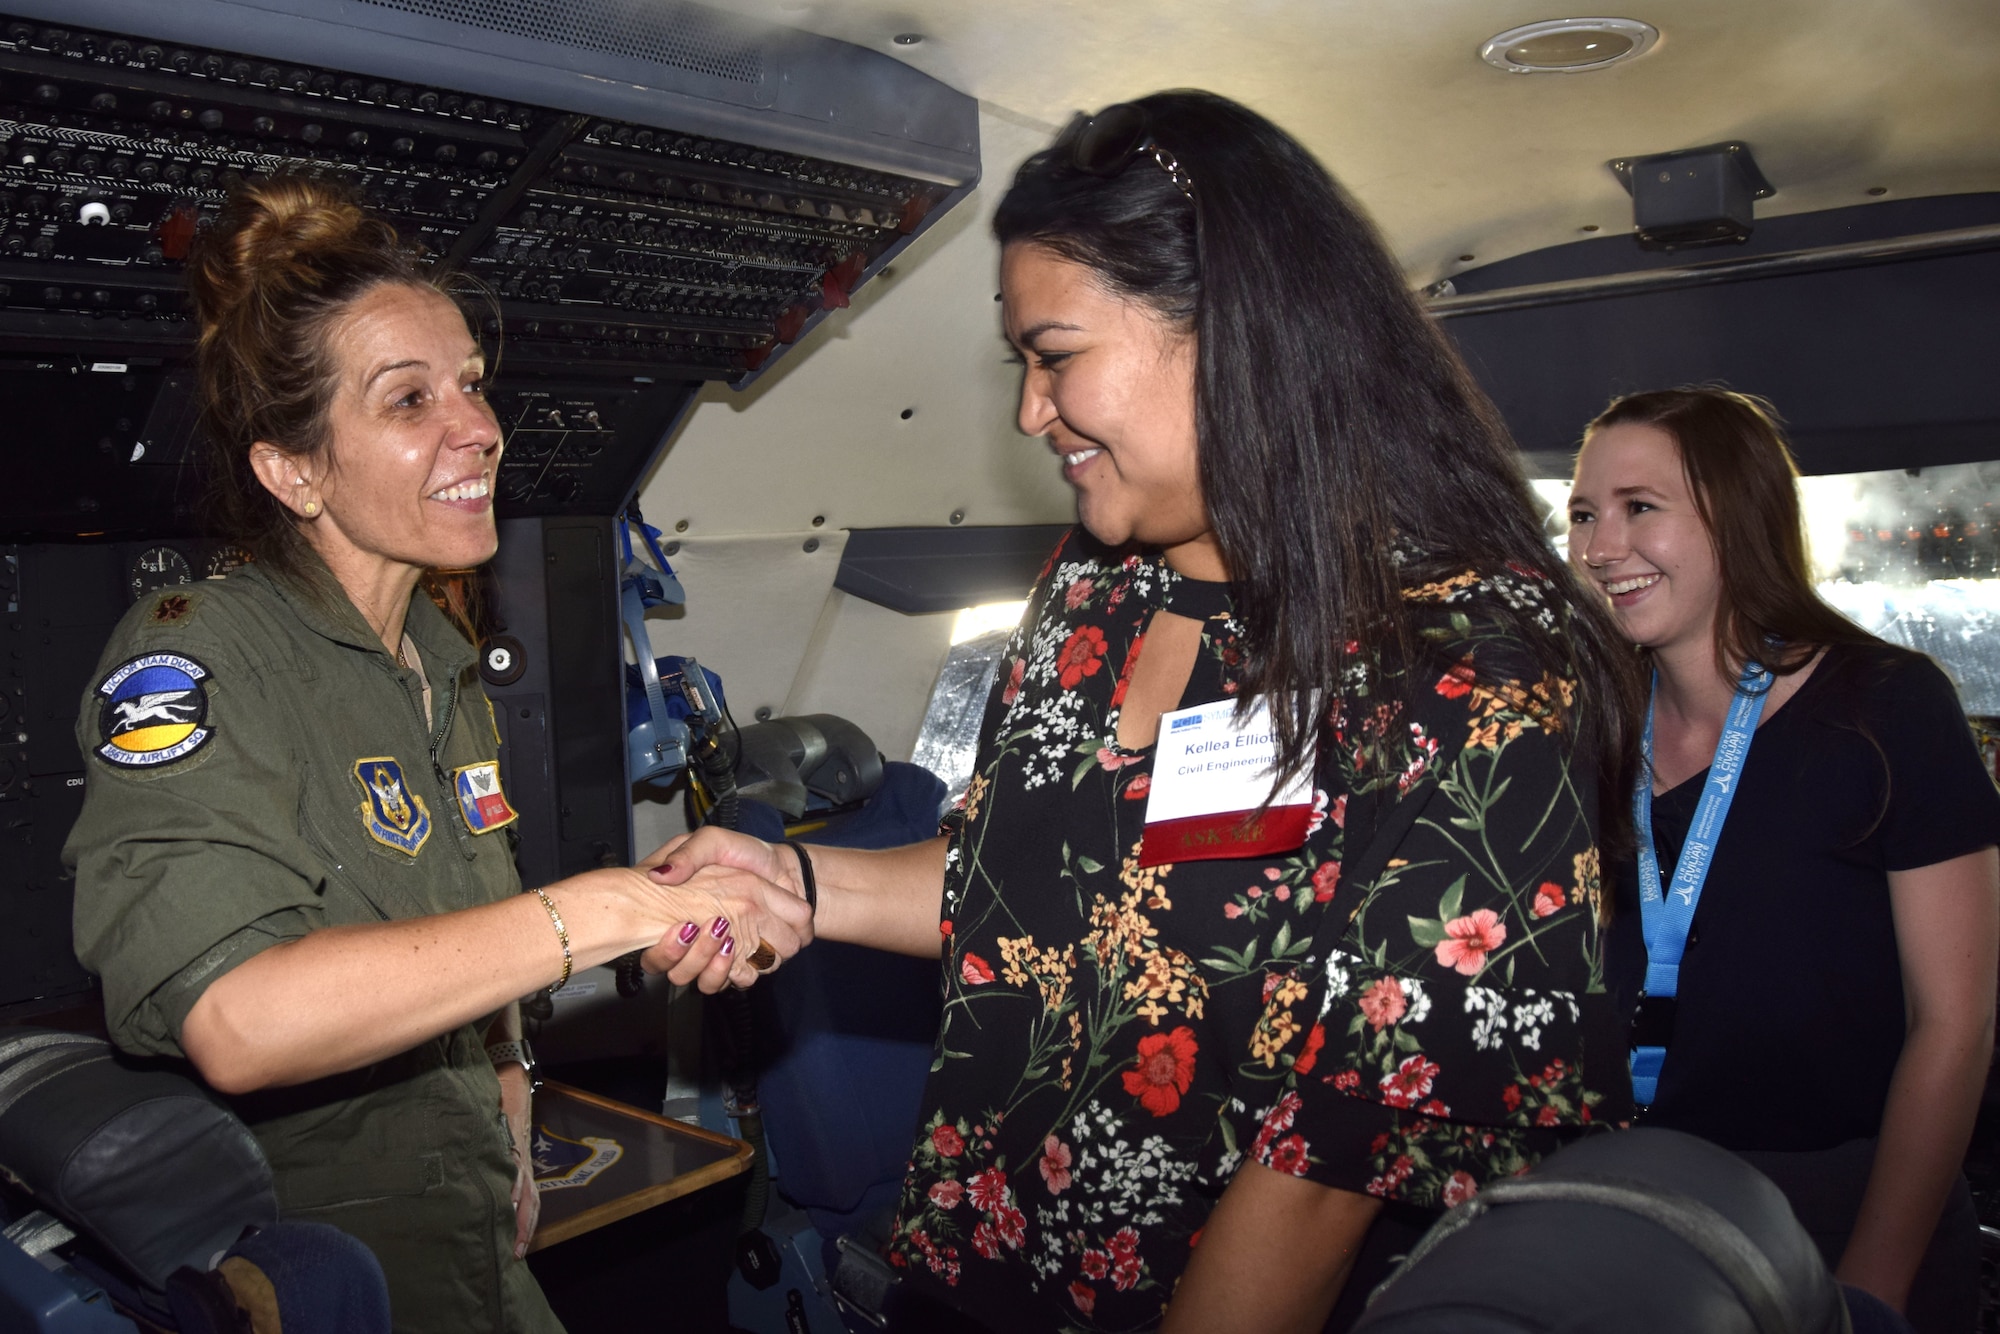 U.S. Air Force Maj. Amy Tullis, 356th Airlift Squadron instructor pilot, shakes hands with Kellea Elliott, an Air Force Personnel Center Premier College Intern Program symposium attendee, while in the C5-M Super Galaxy cockpit during a tour to the 433rd Airlift Wing May 16, 2018, at Joint Base San Antonio-Lackland, Texas. Tullis used her 15 years of piloting experience to brief about the aircraft and answer questions from interns. (U.S. Air Force photo by Tech. Sgt. Iram Carmona)